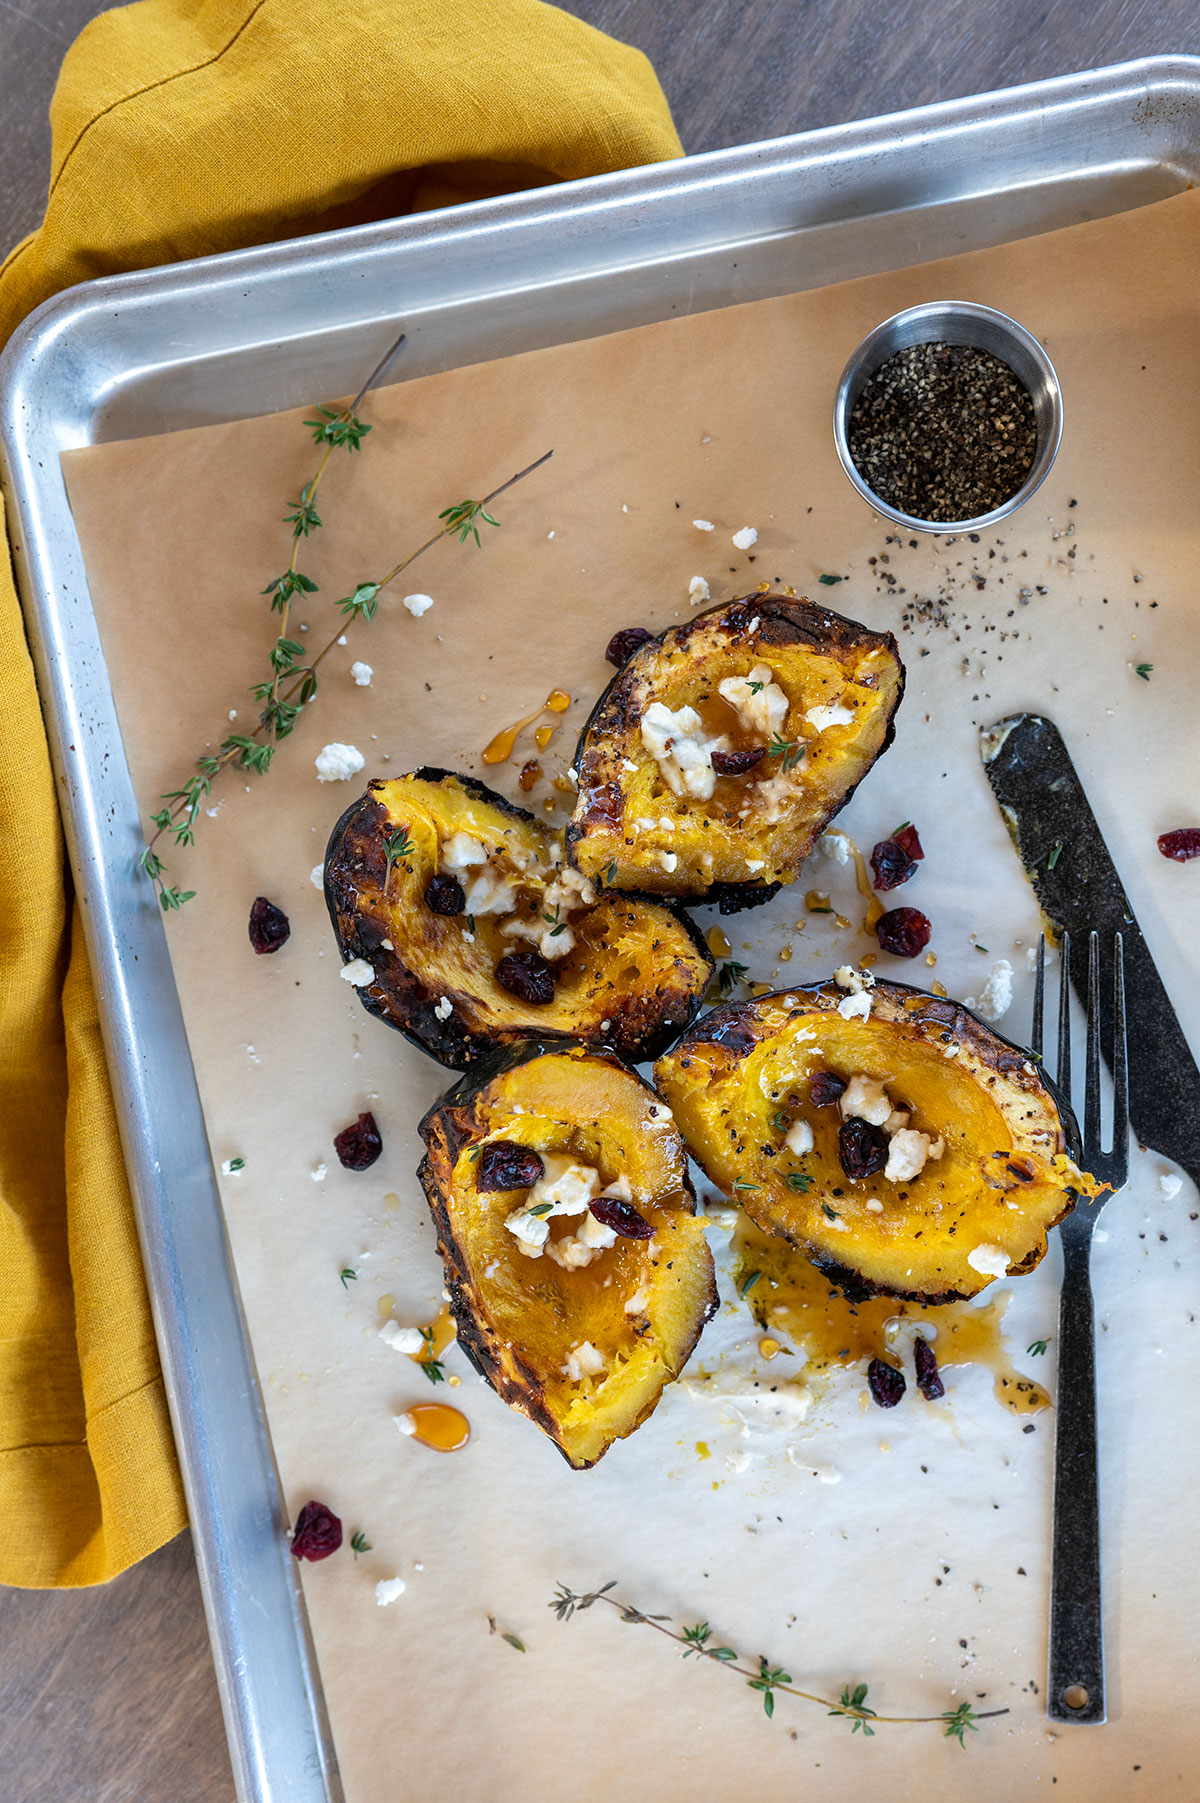 grilled acorn squash cut into quarters with goat cheese and cranberries.